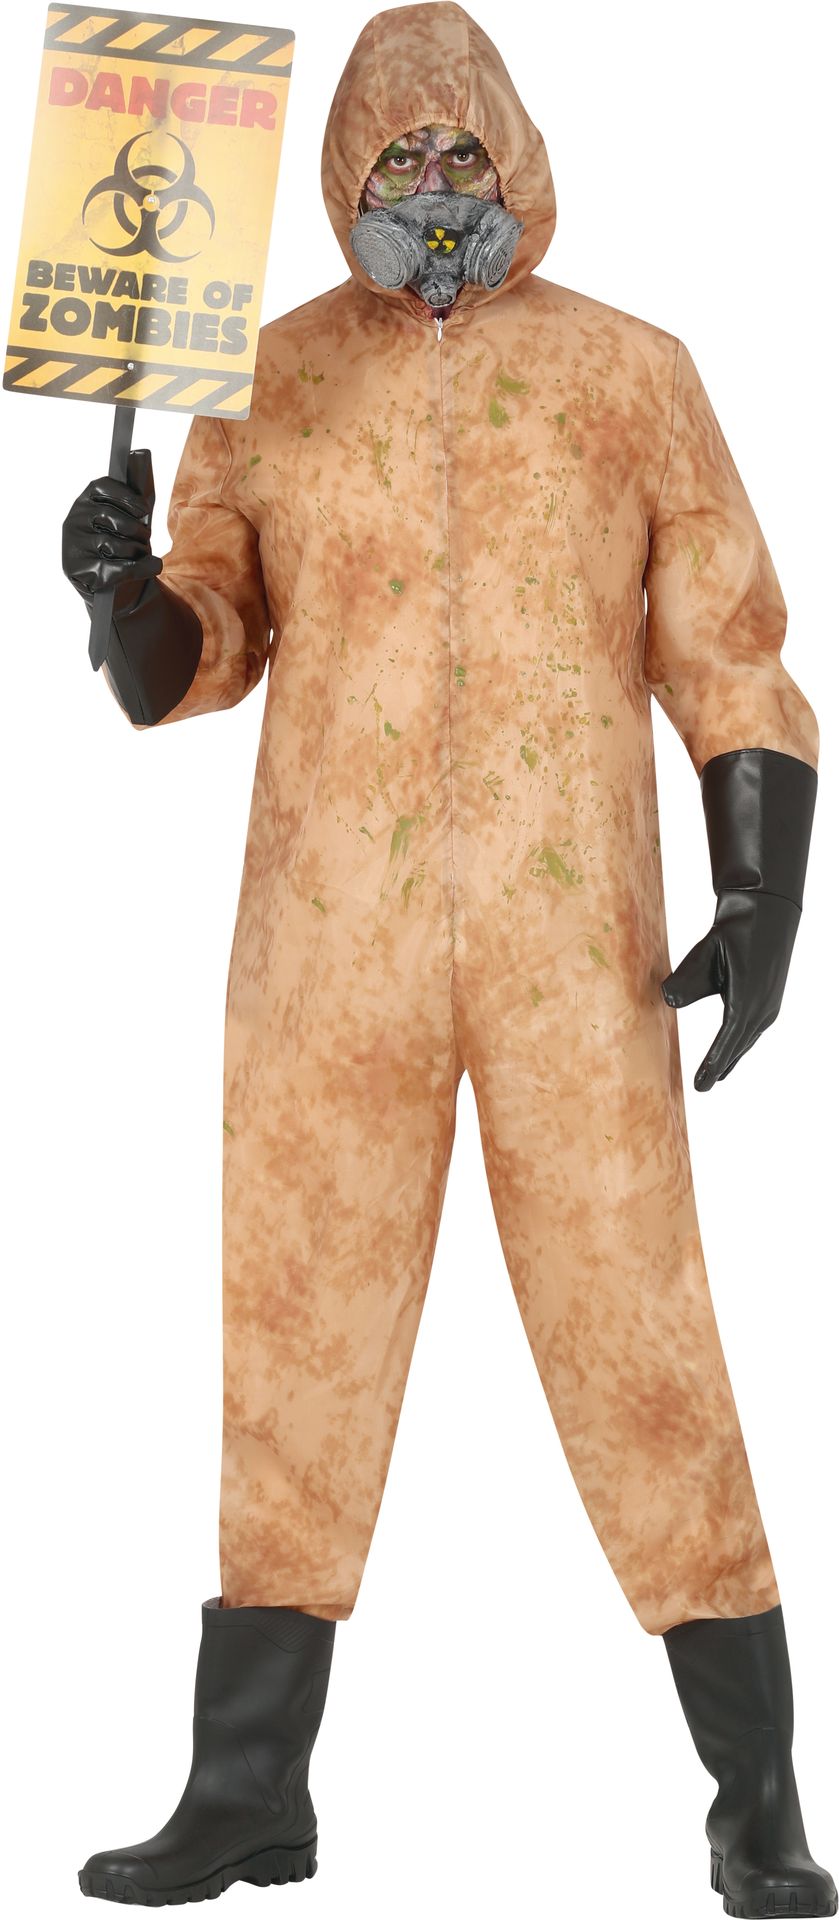 Chernobyl zombie outfit